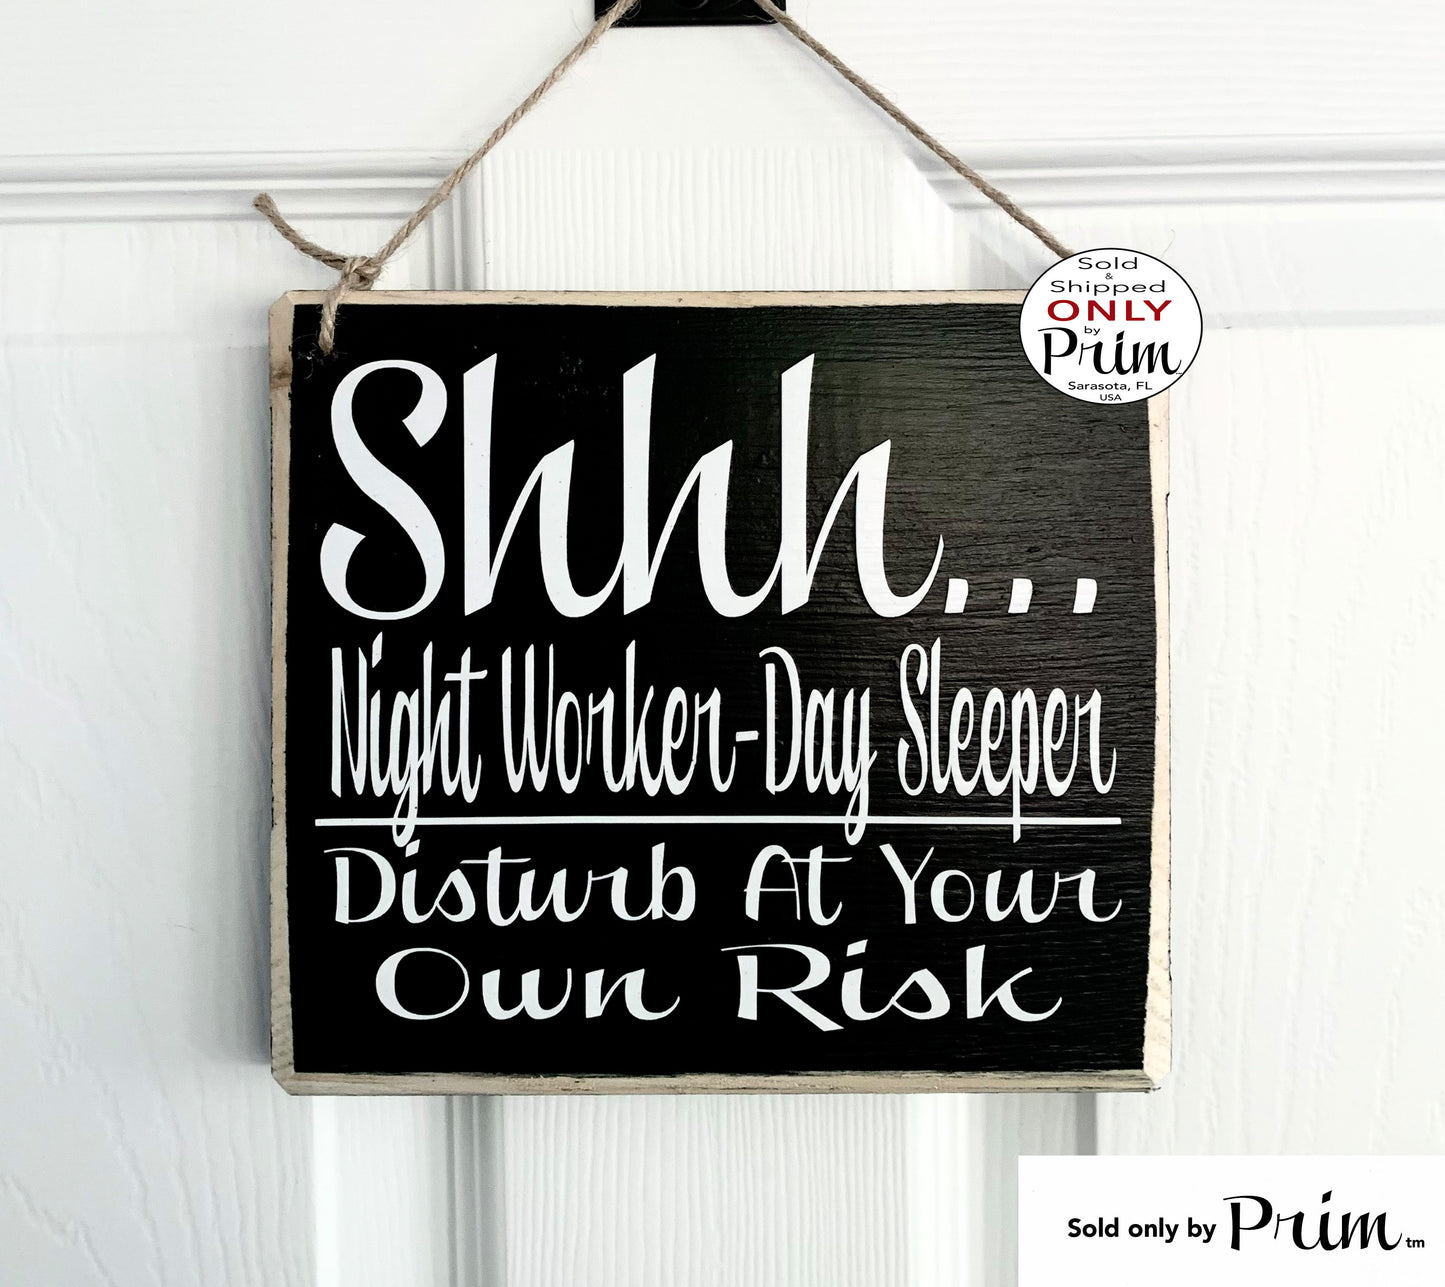 Designs by Prim 8x8 Shhh Day Sleeper Night Worker Disturb at Your Own Risk Custom Wood Sign Nurse Graveyard Shift Please Do Not Disturb Knock Napping